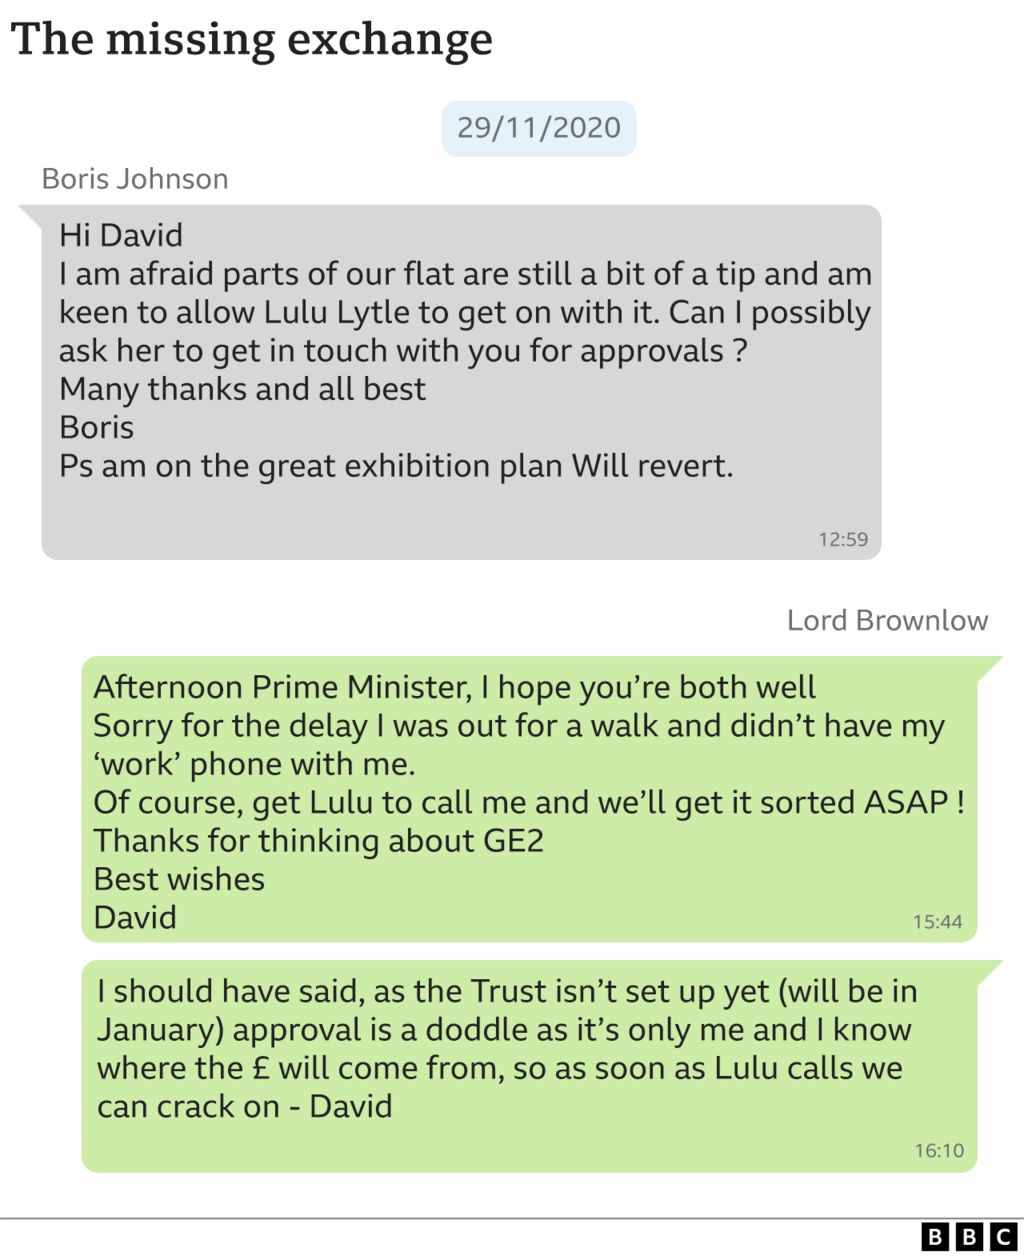 Graphic showing Boris Johnson's text exchange with Lord Brownlow